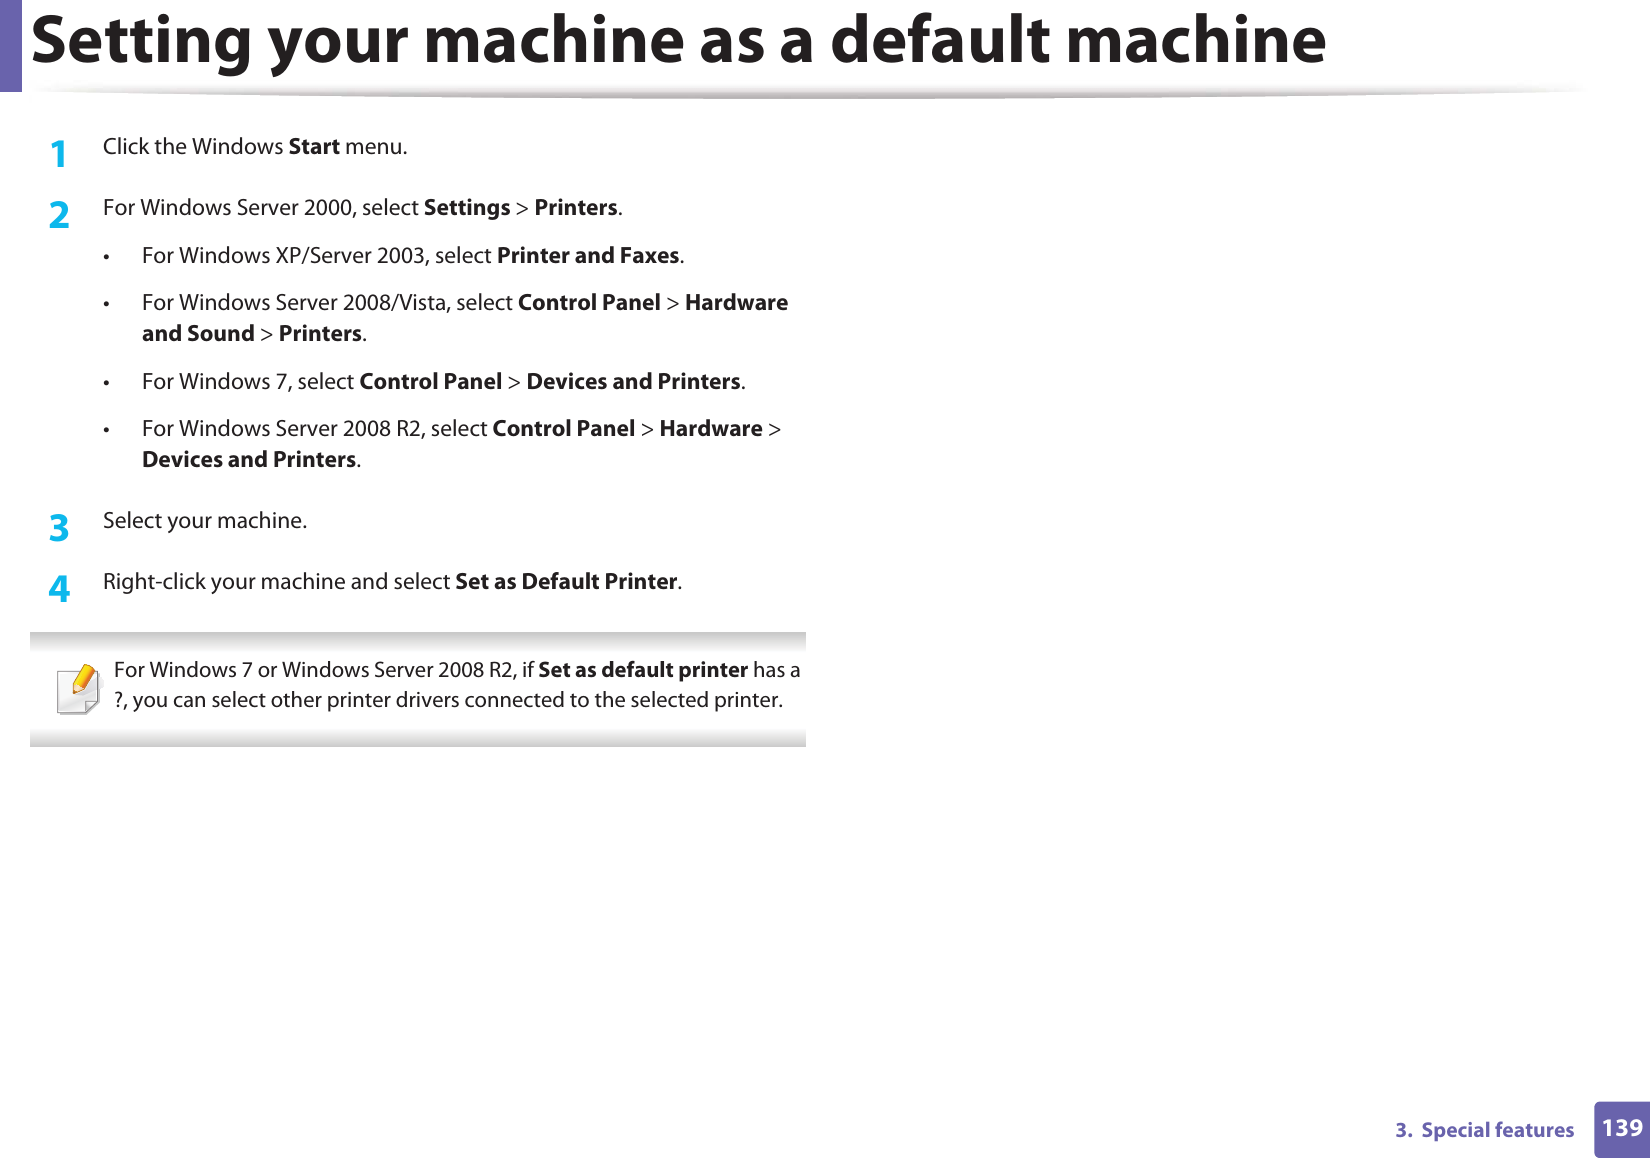 1393.  Special featuresSetting your machine as a default machine1Click the Windows Start menu.2  For Windows Server 2000, select Settings &gt; Printers.• For Windows XP/Server 2003, select Printer and Faxes. • For Windows Server 2008/Vista, select Control Panel &gt; Hardware and Sound &gt; Printers. • For Windows 7, select Control Panel &gt; Devices and Printers. • For Windows Server 2008 R2, select Control Panel &gt; Hardware &gt; Devices and Printers. 3  Select your machine.4  Right-click your machine and select Set as Default Printer. For Windows 7 or Windows Server 2008 R2, if Set as default printer has a ?, you can select other printer drivers connected to the selected printer. 